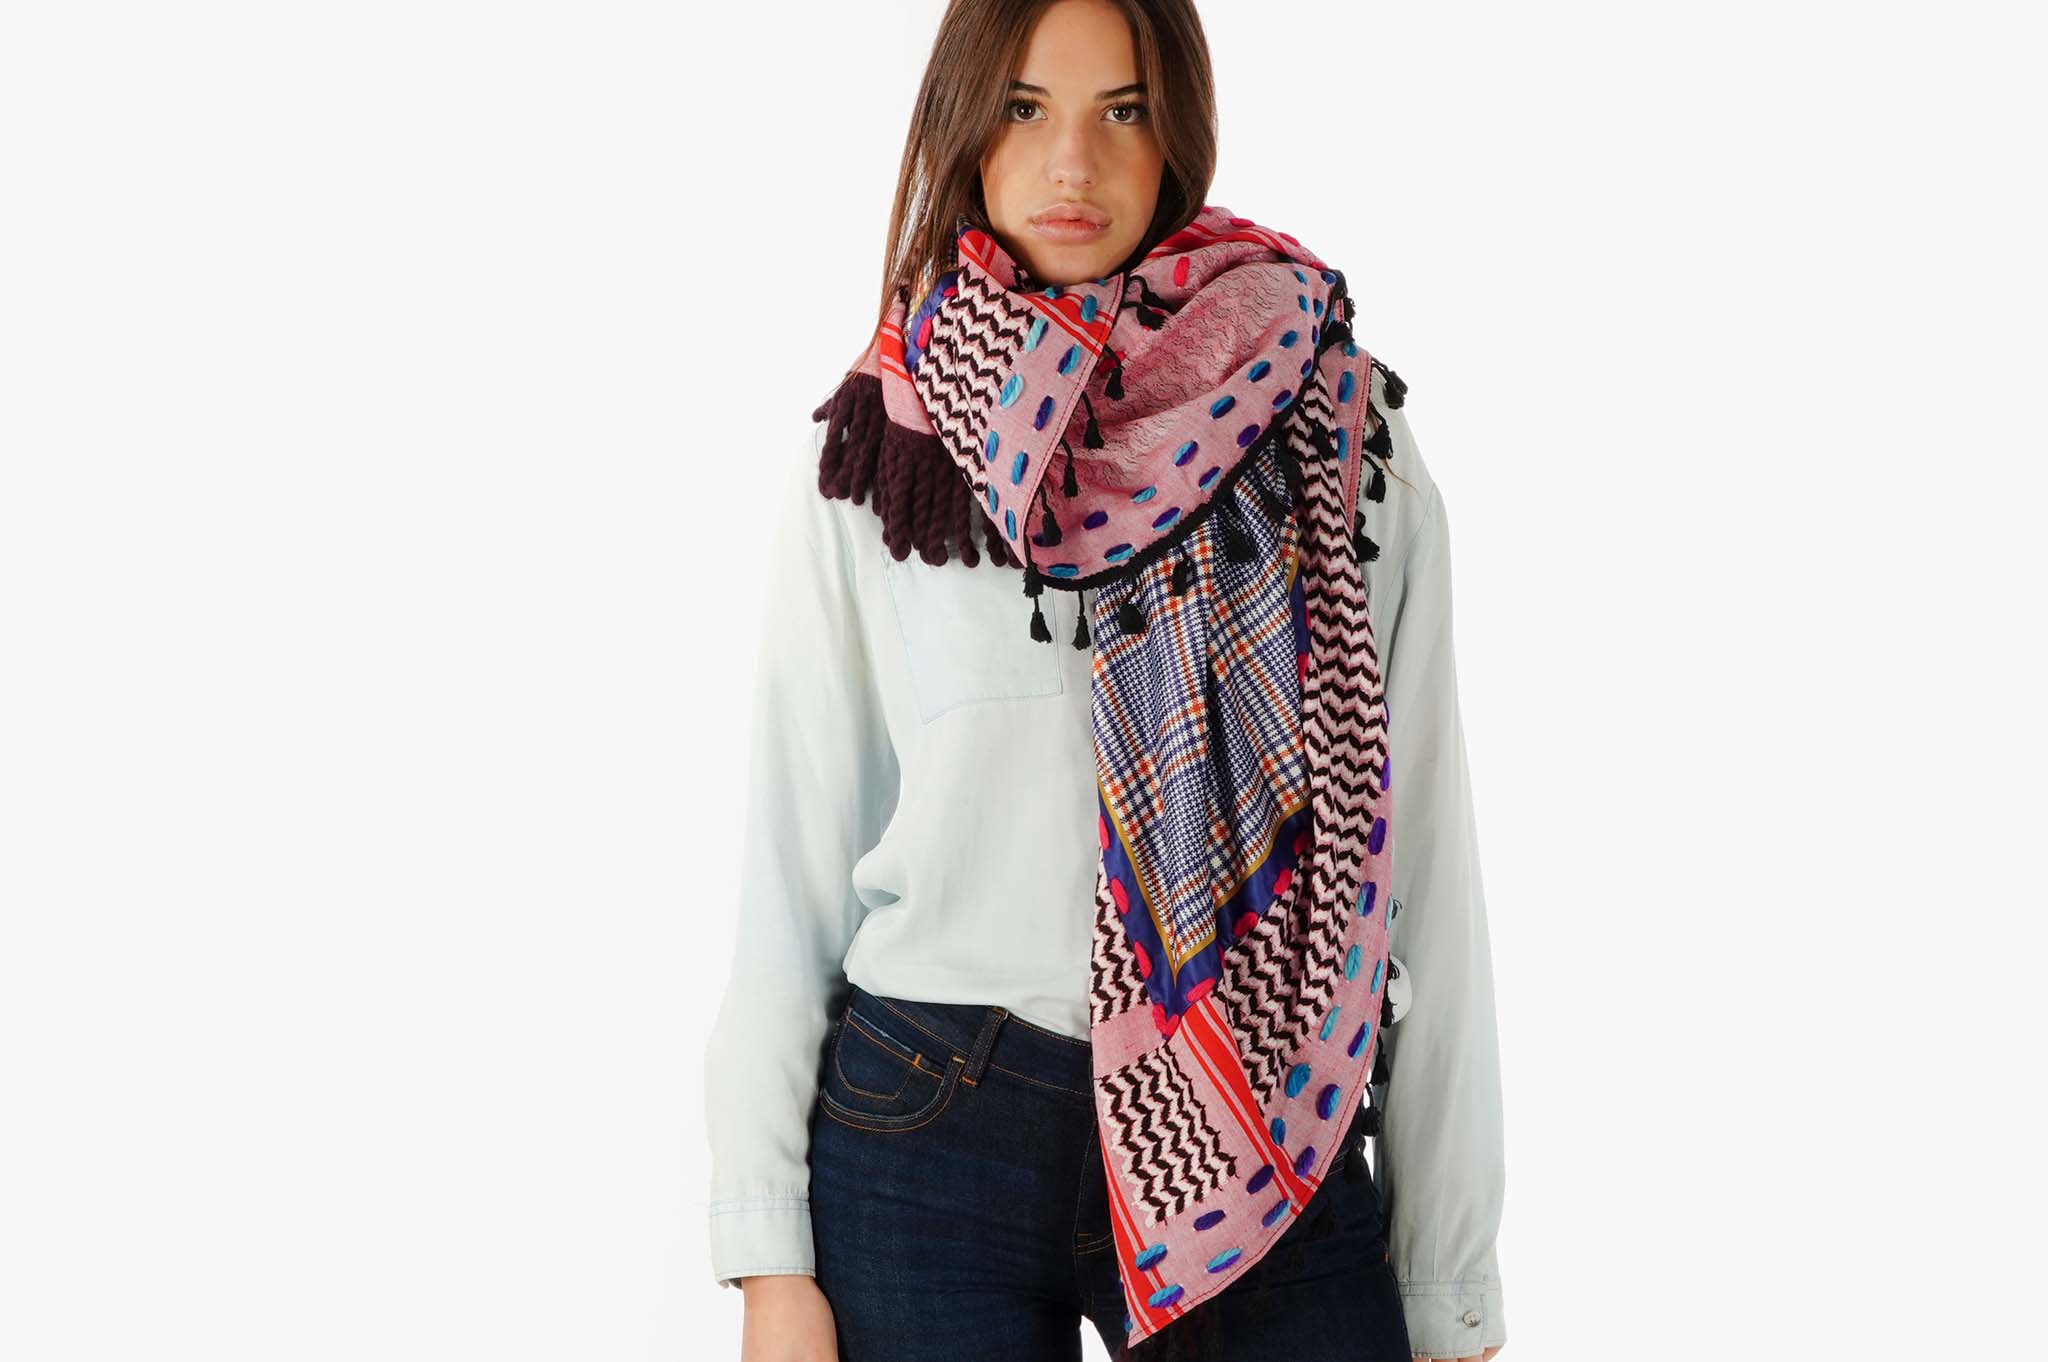 Gum pink keffiyeh doubled with micro cheks silk foulard and edged with wool burgundy fringe